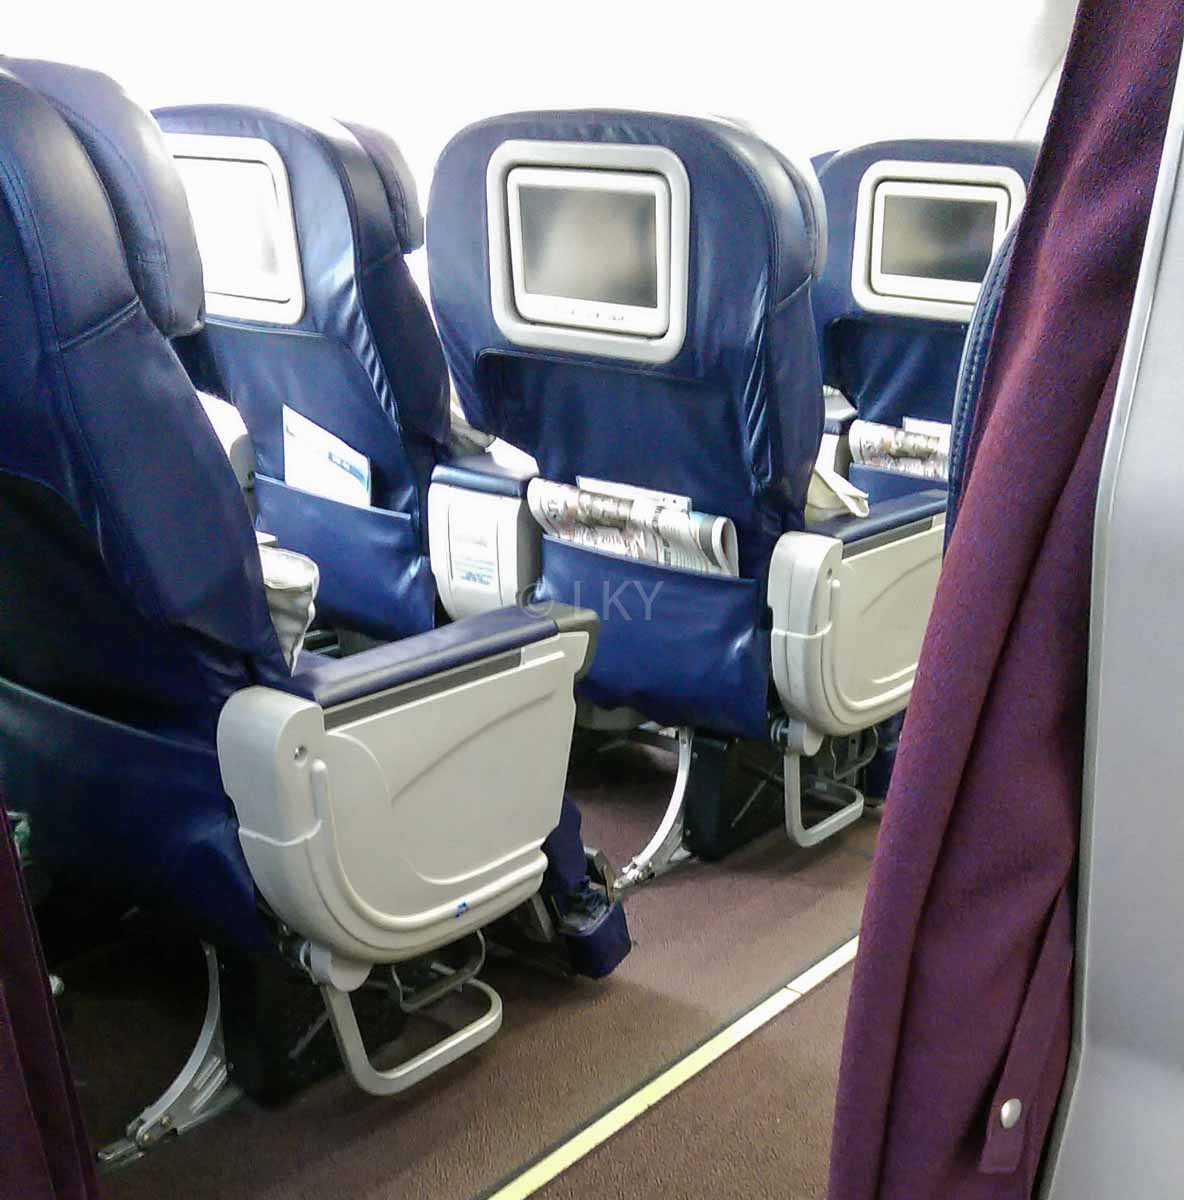 Business Class bargains, Business Class seating